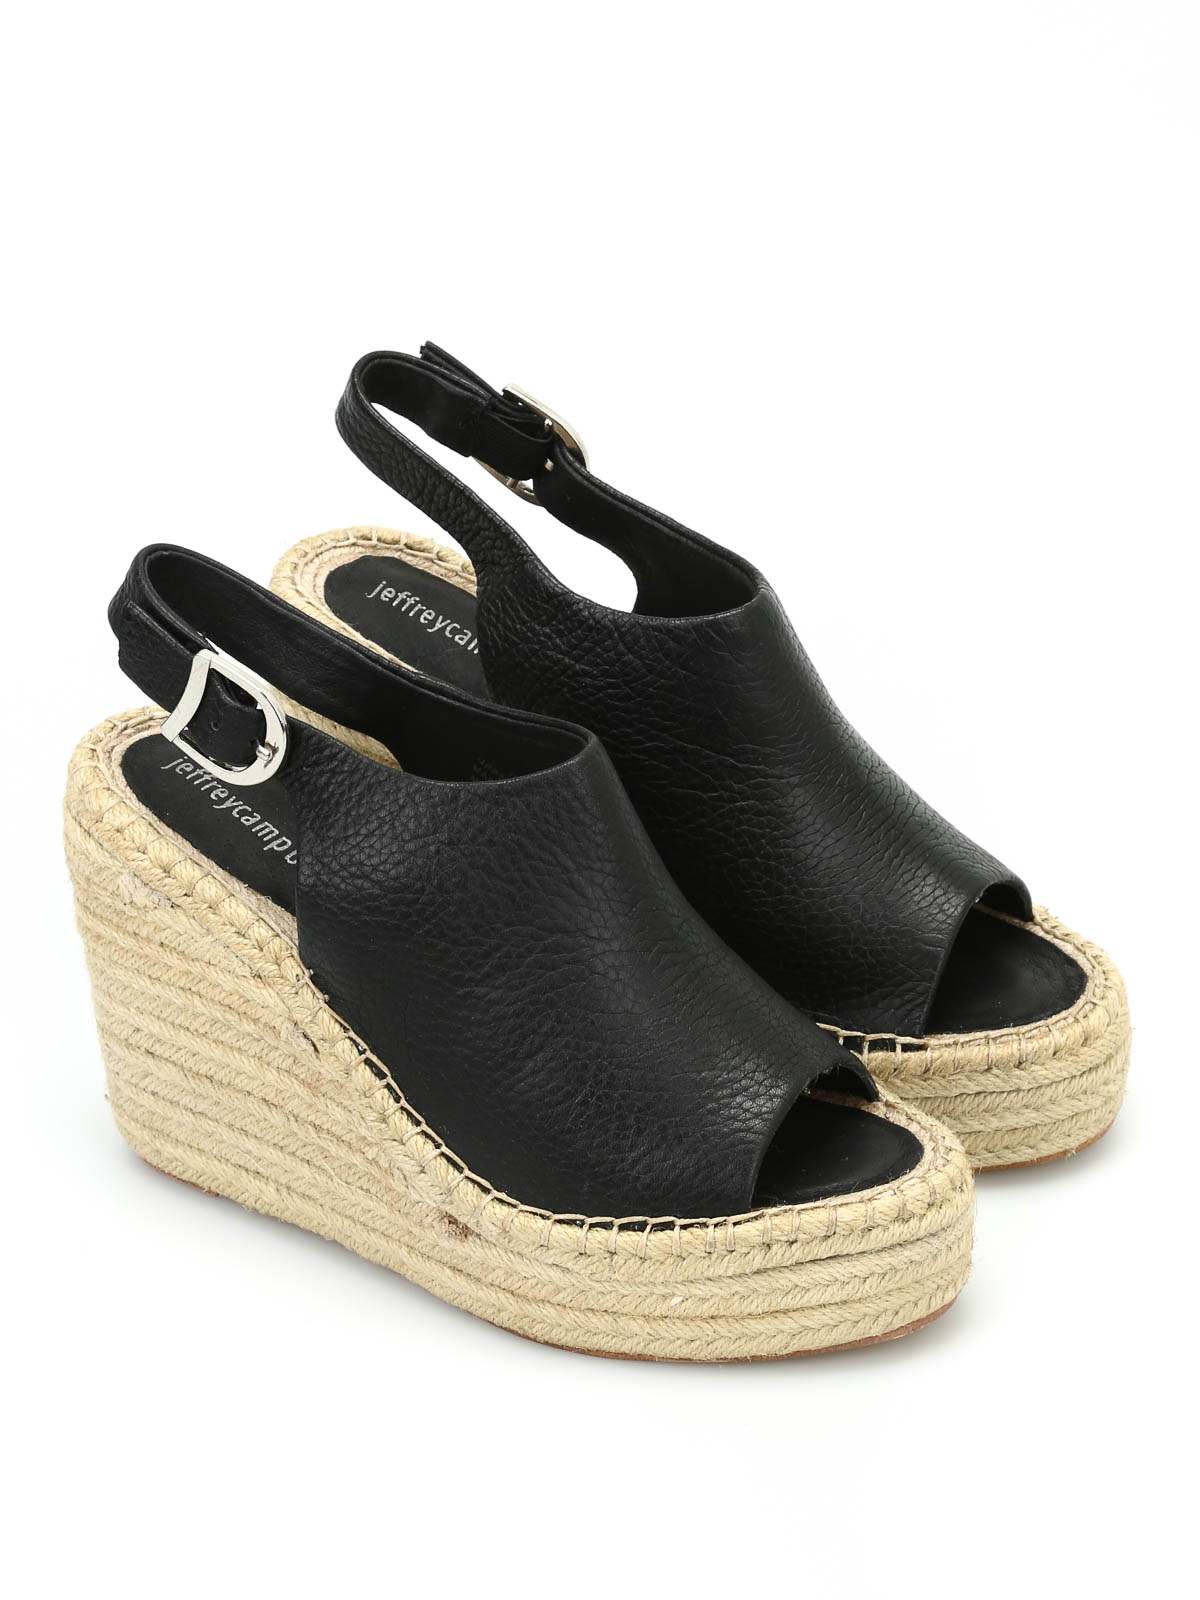 Jeffrey Campbell - Isles leather wedges 